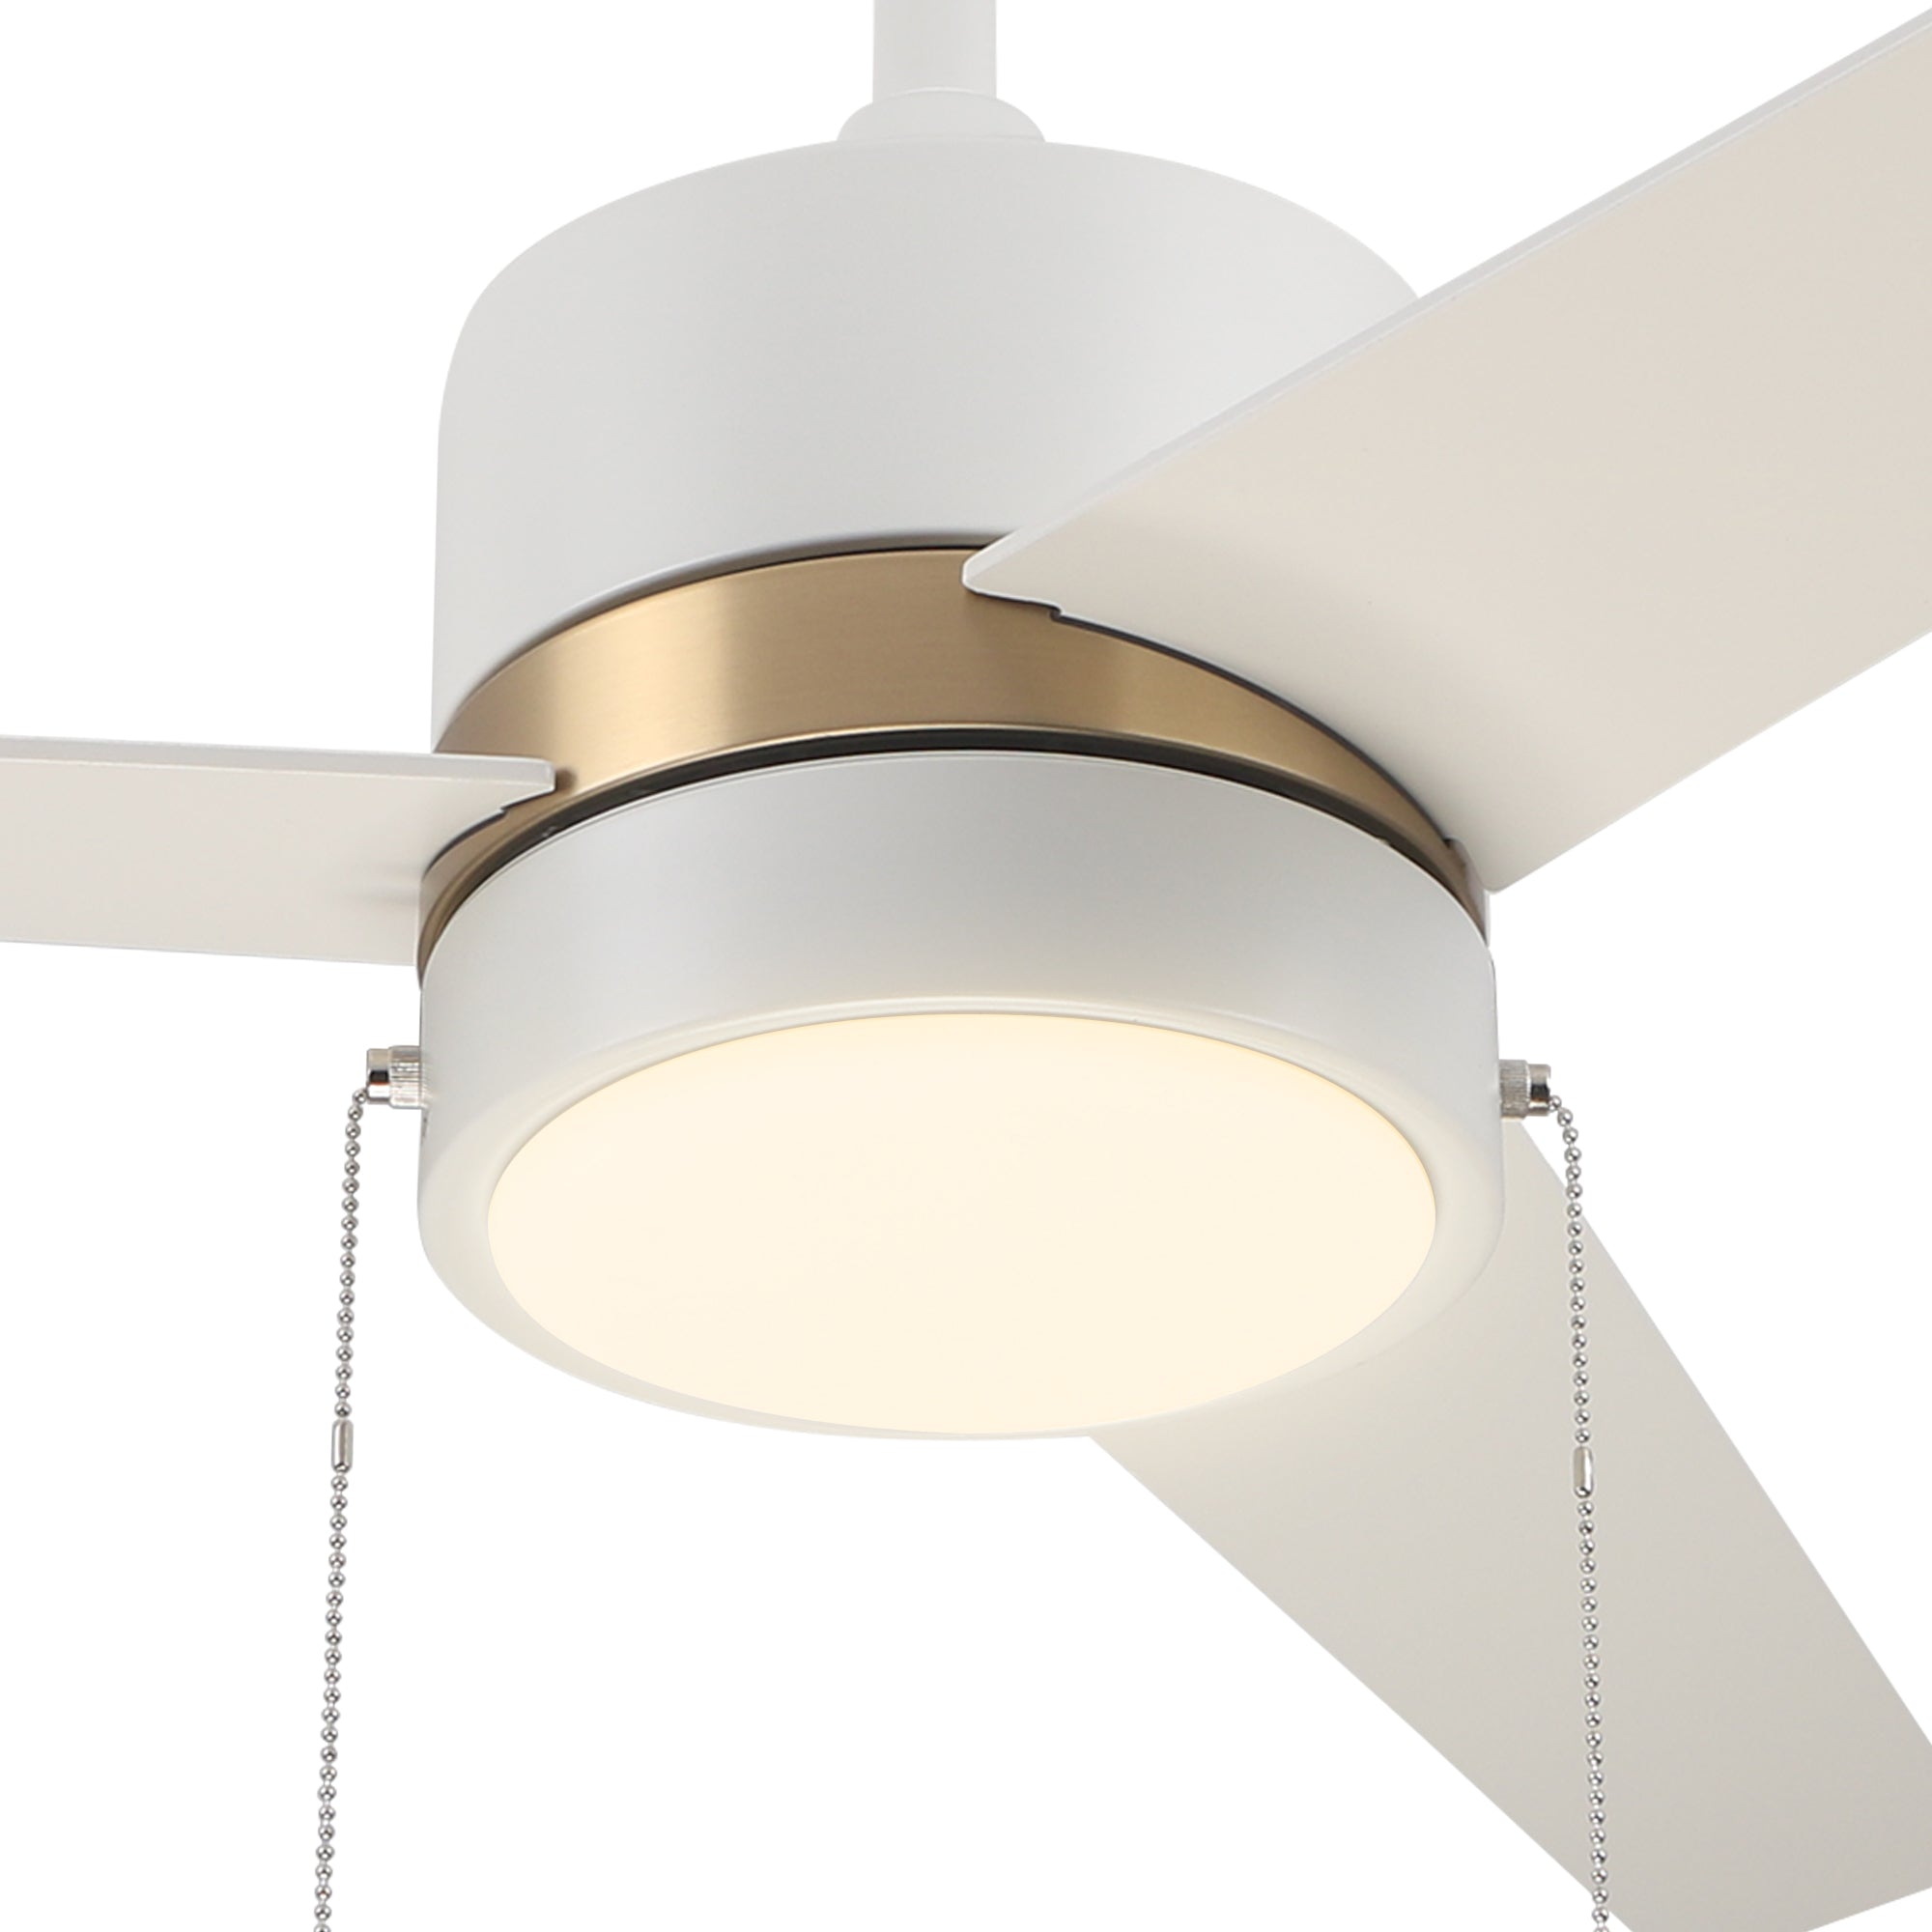 Pristine white exterior, elegant plywood blades, charming LED light cover come together to create the subtle yet refined Marais 52” Ceiling Fan. #color_White